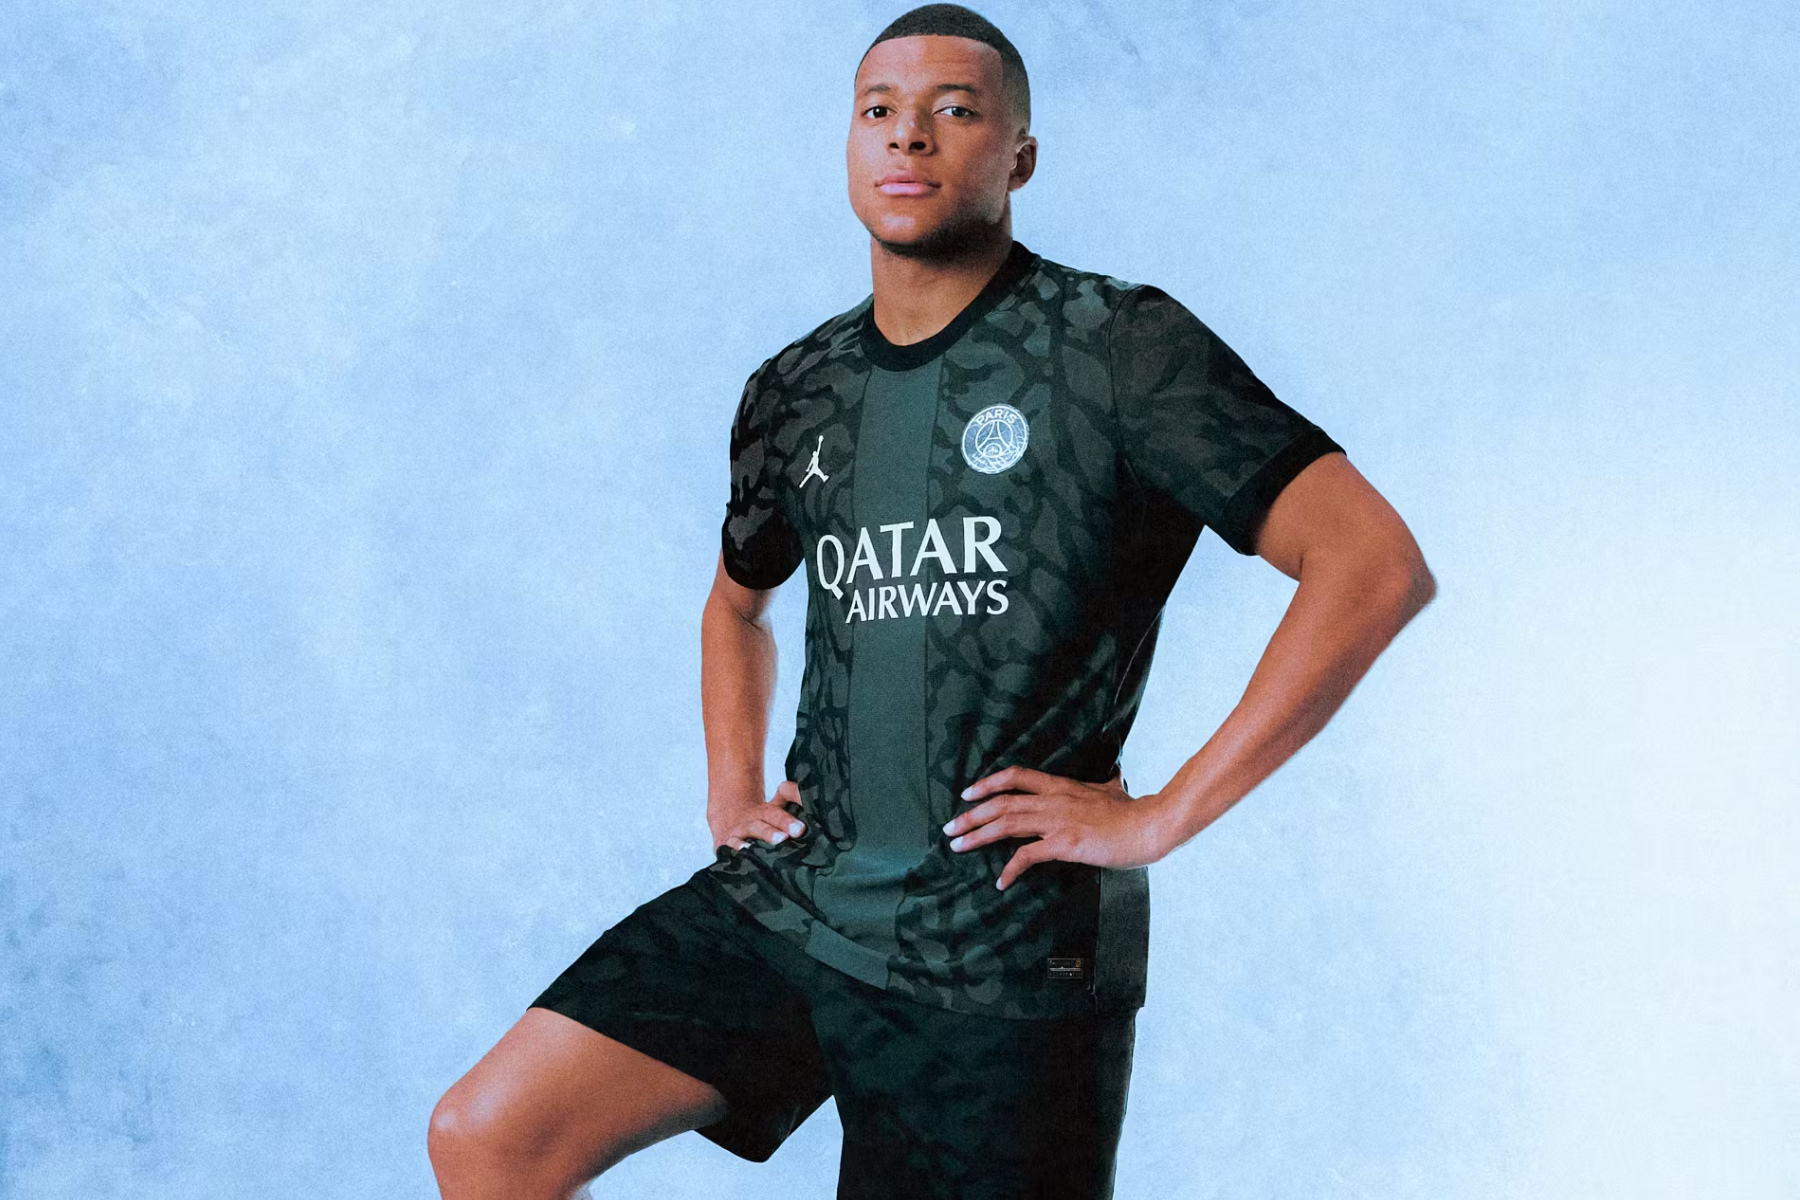 Classic Football Shirts on X: PSG x Jordan There are rumours that the next  Jordan and PSG collaboration will be for the home kit. Pro Evo kit designer  @EderMello86 has created the